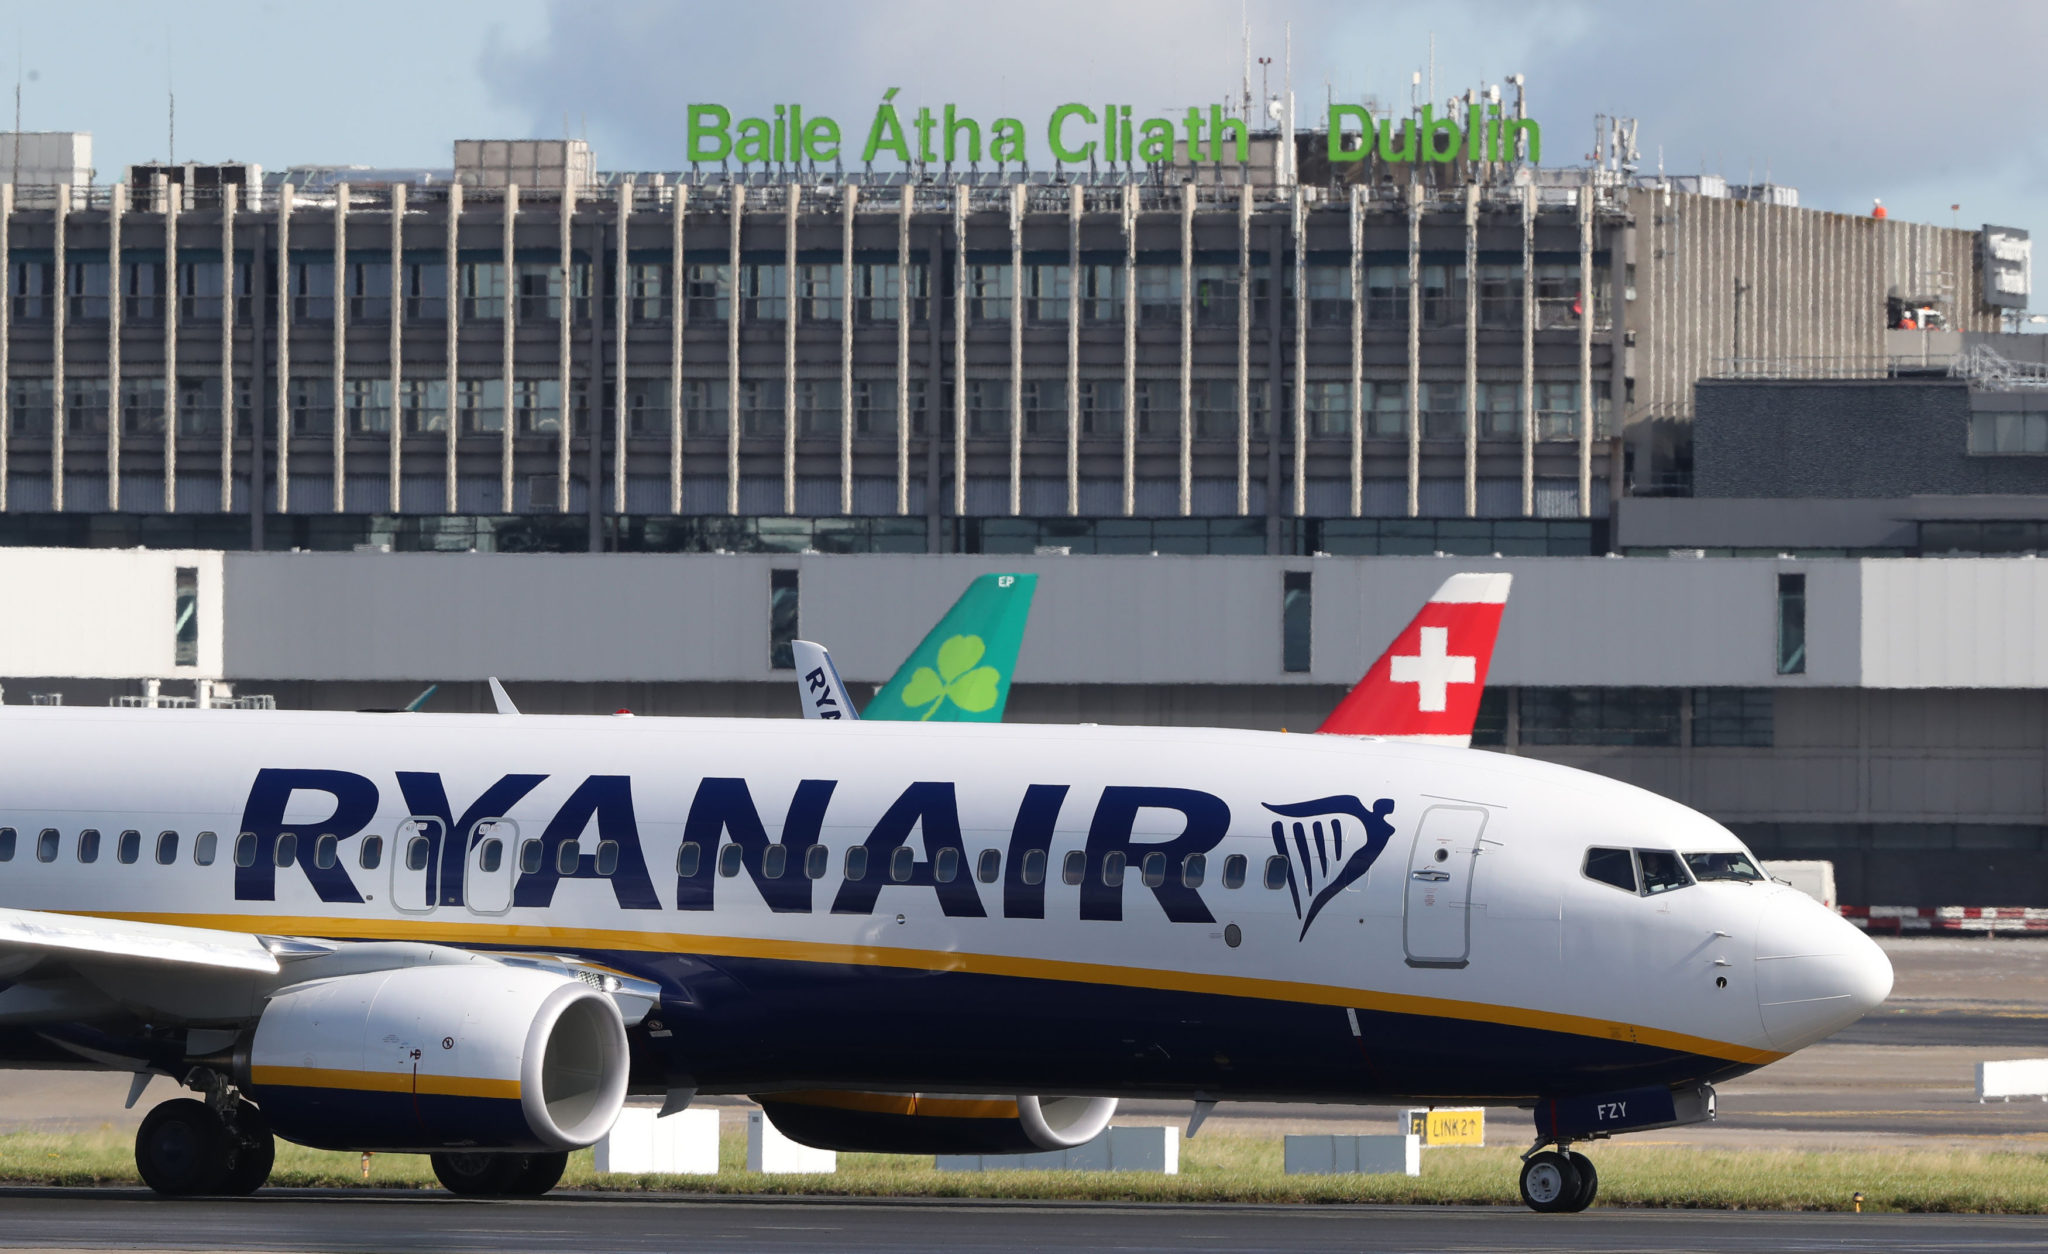 A Ryanair jet is seen at Dublin Airport in September 2017.